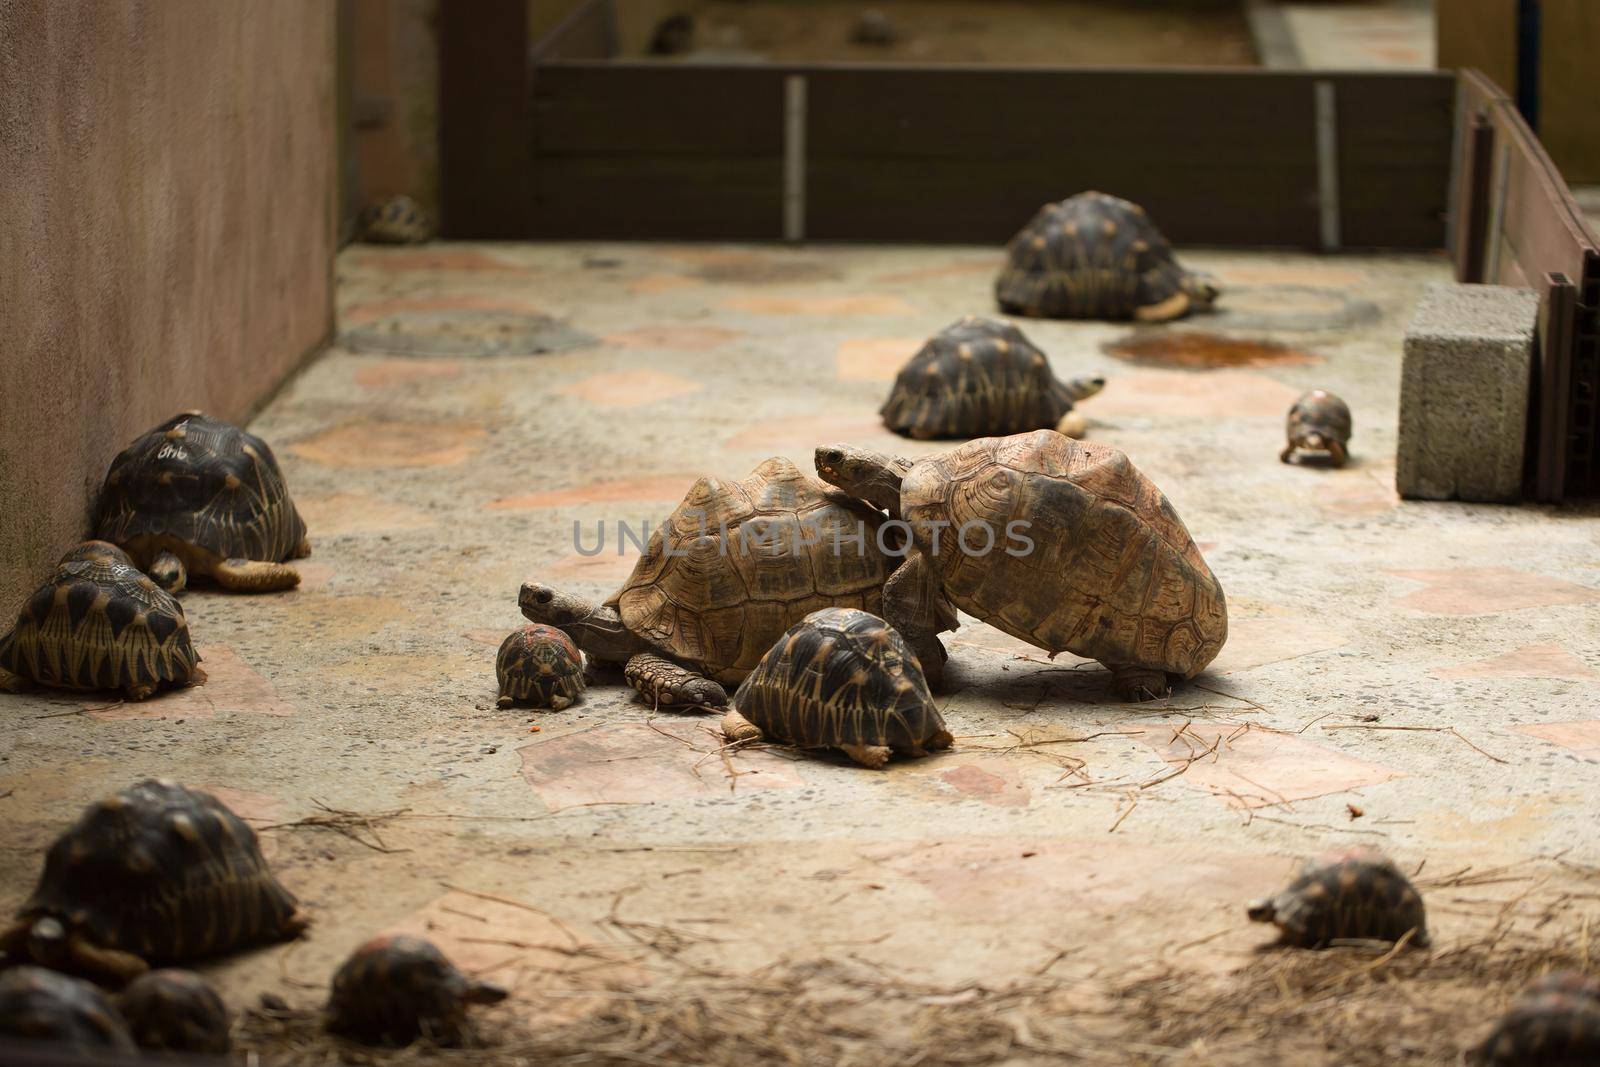 Huge Seychelles tortoises mating at the zoo by StudioPeace